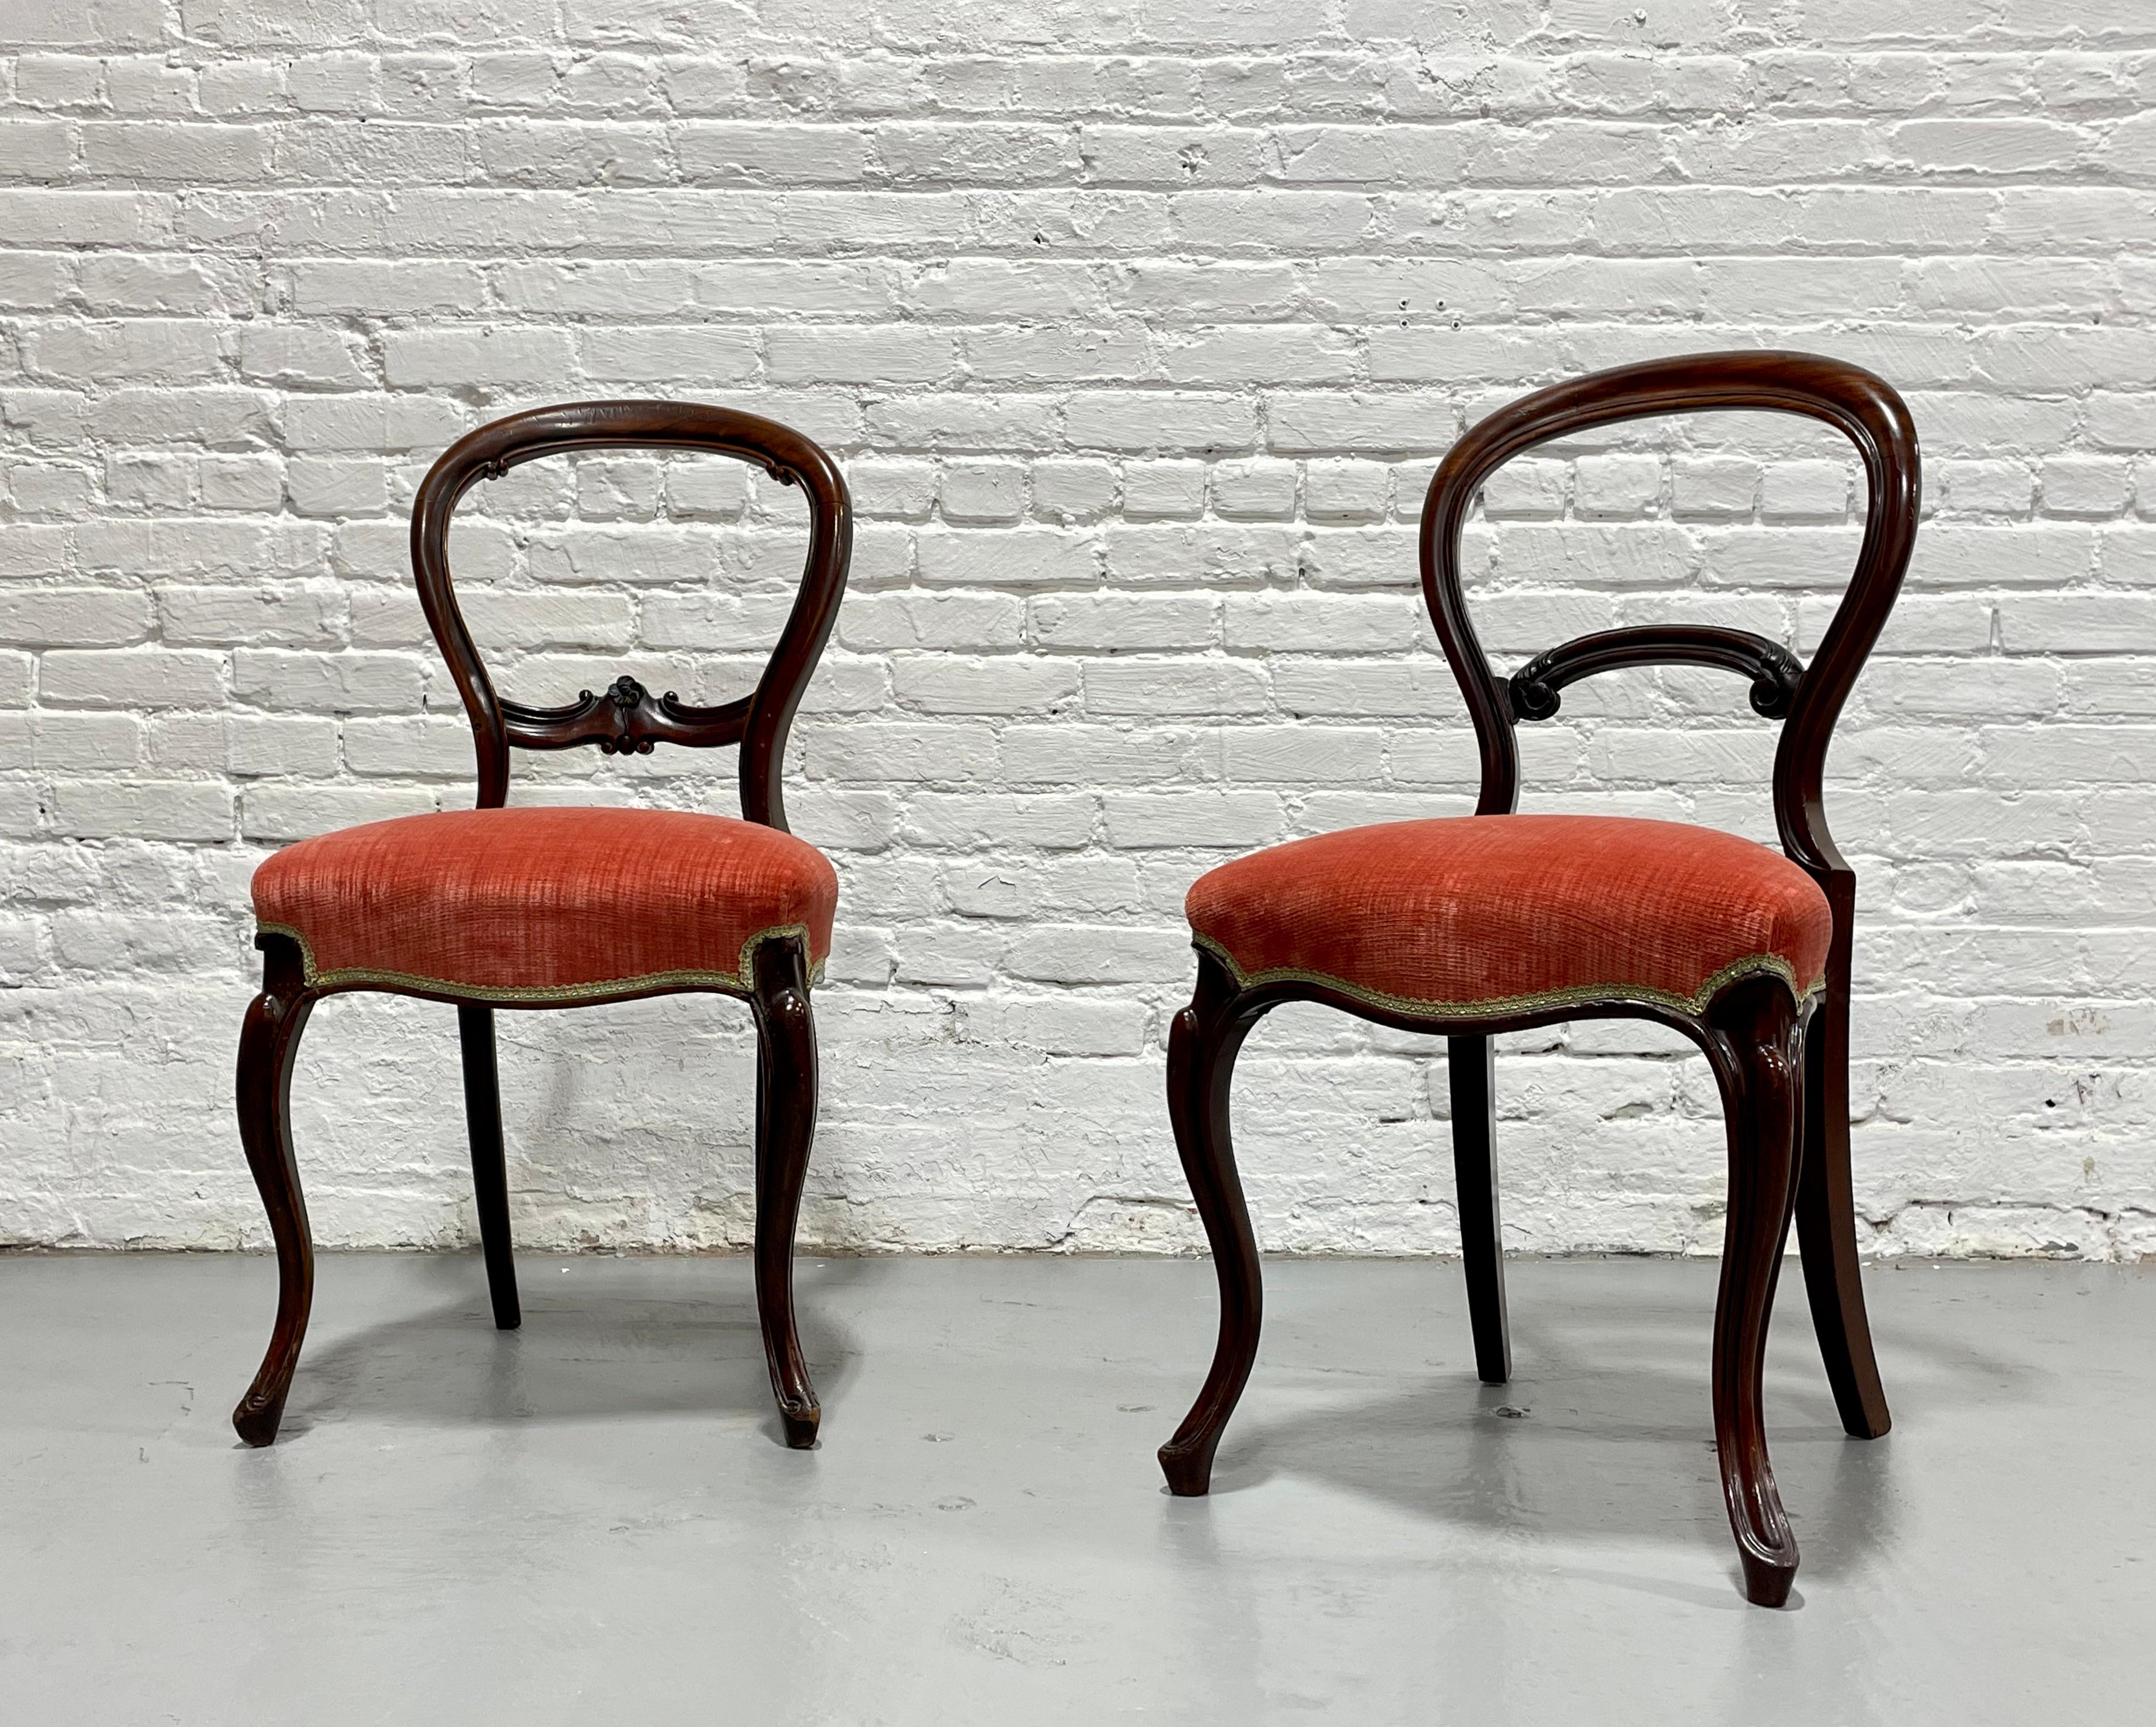 Pair of Antique VICTORIAN Balloon SIDE CHAIRS, c. 1870’s 7